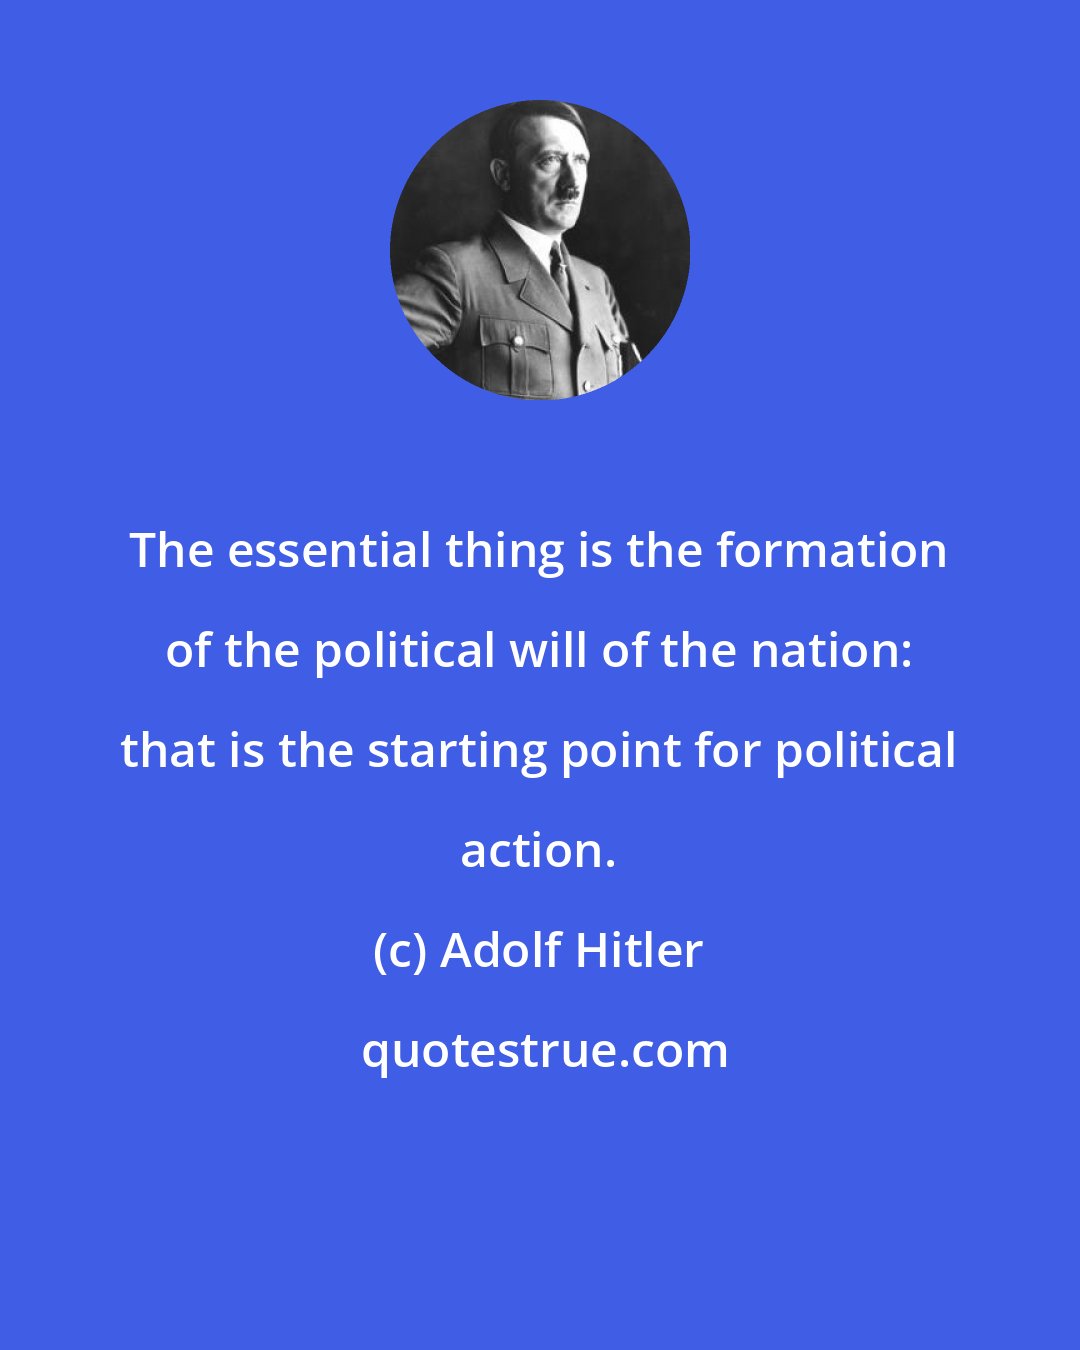 Adolf Hitler: The essential thing is the formation of the political will of the nation: that is the starting point for political action.